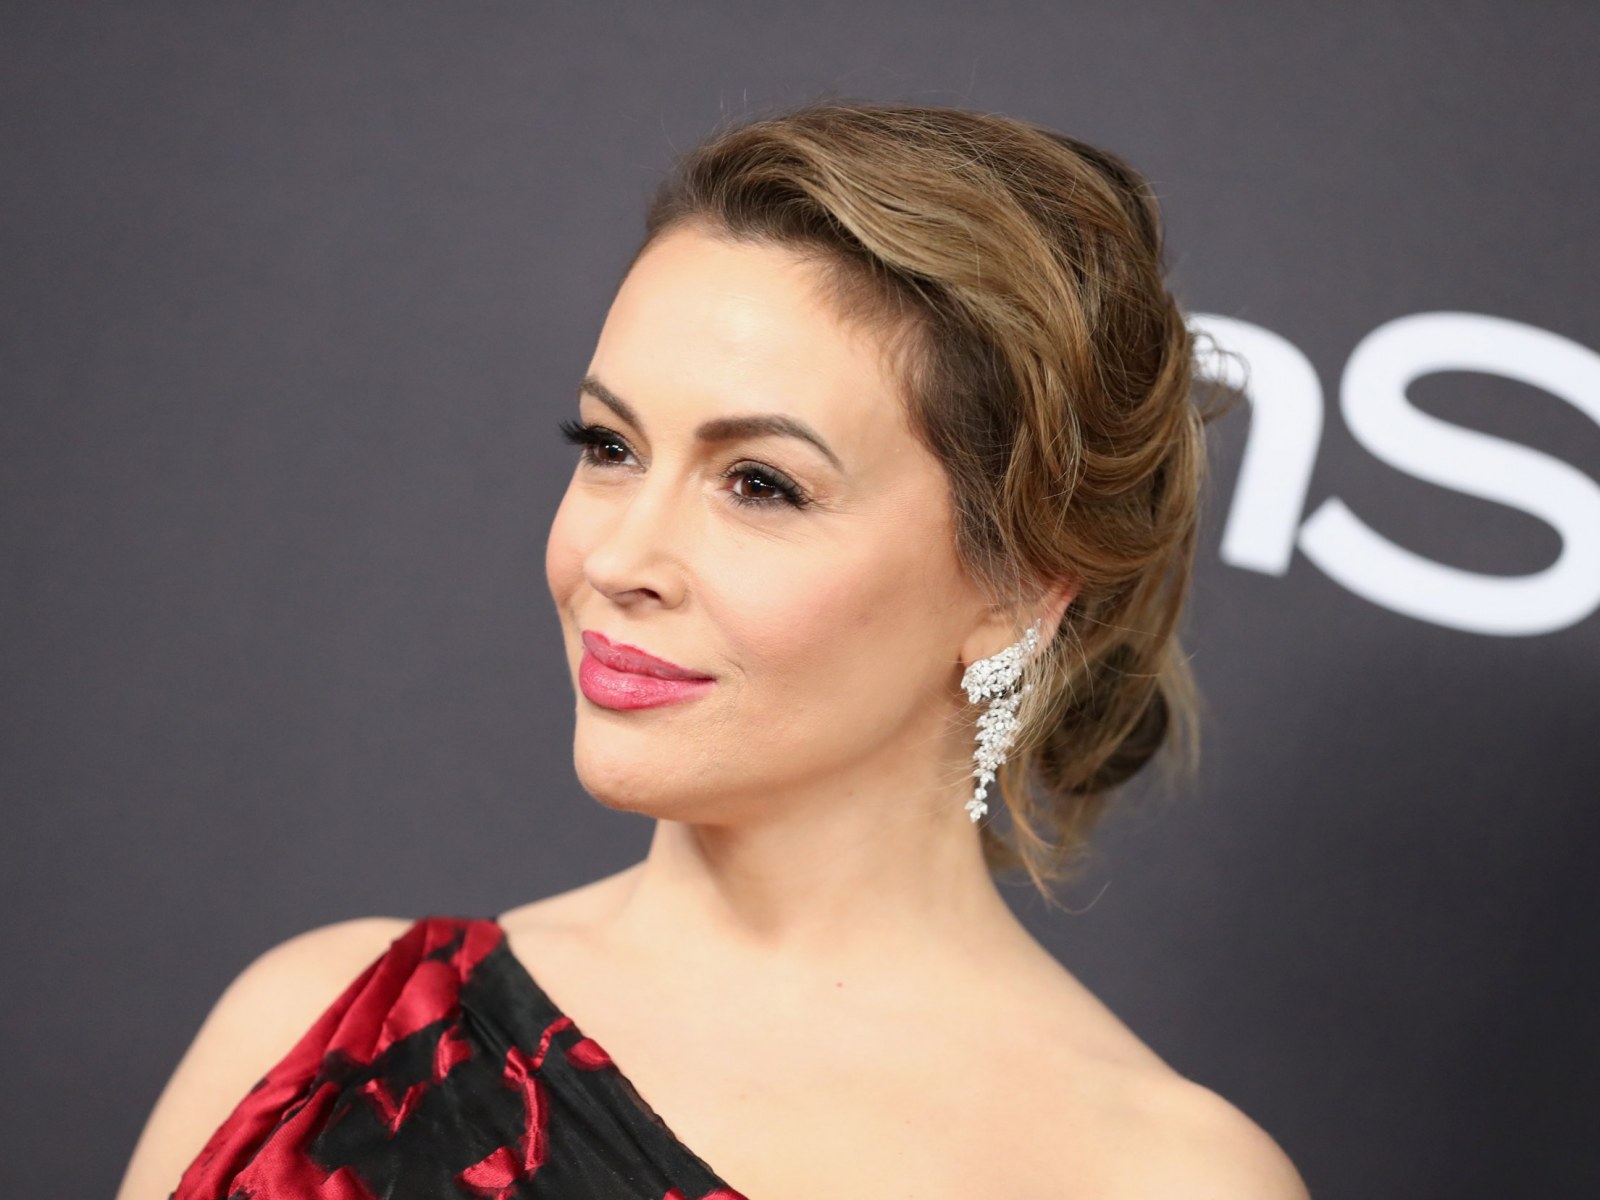 Alyssa milano talks political sorry not sorry podcast its a natural extension of me